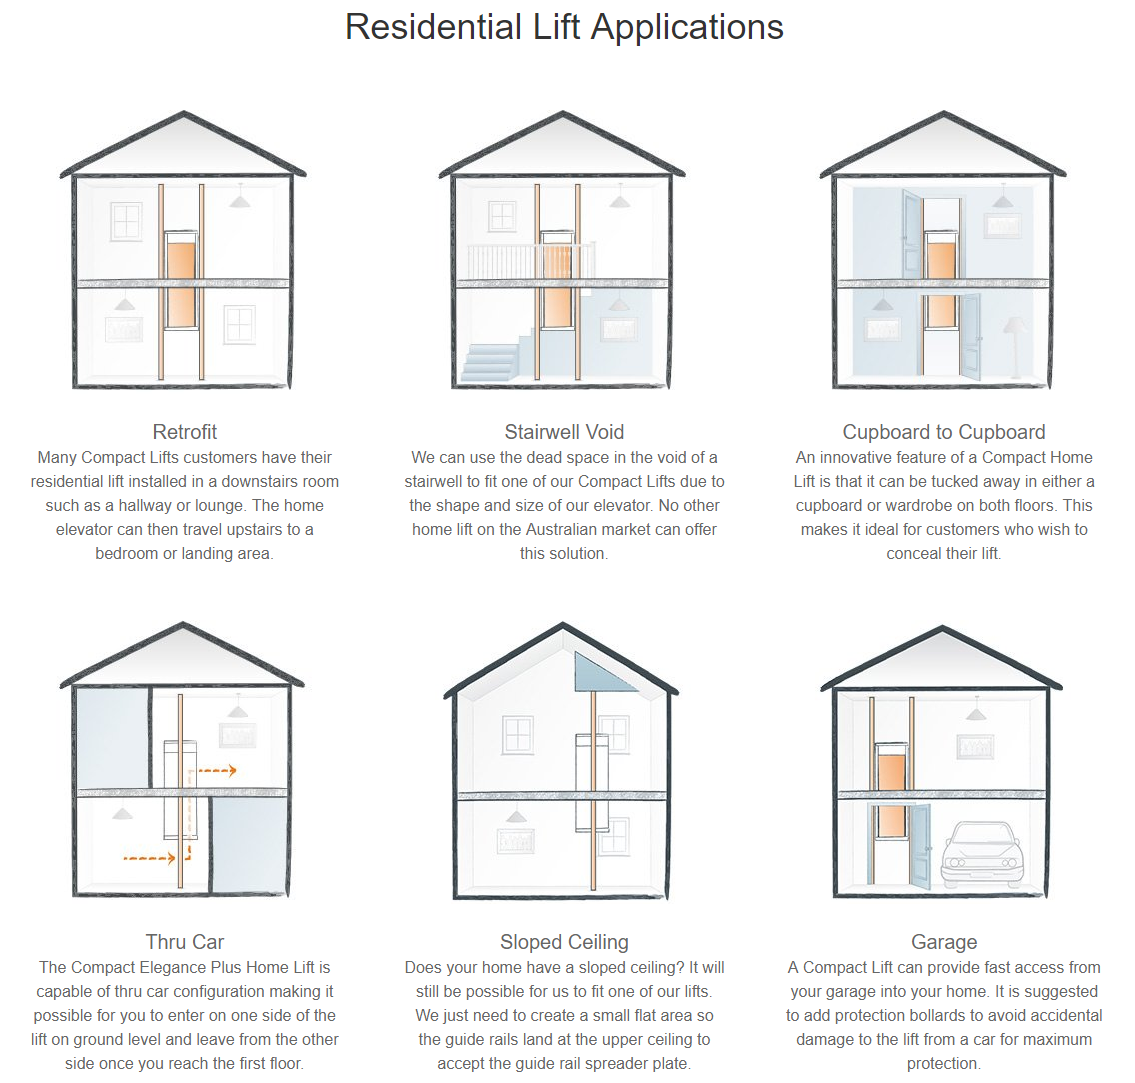 Residential Lift Application